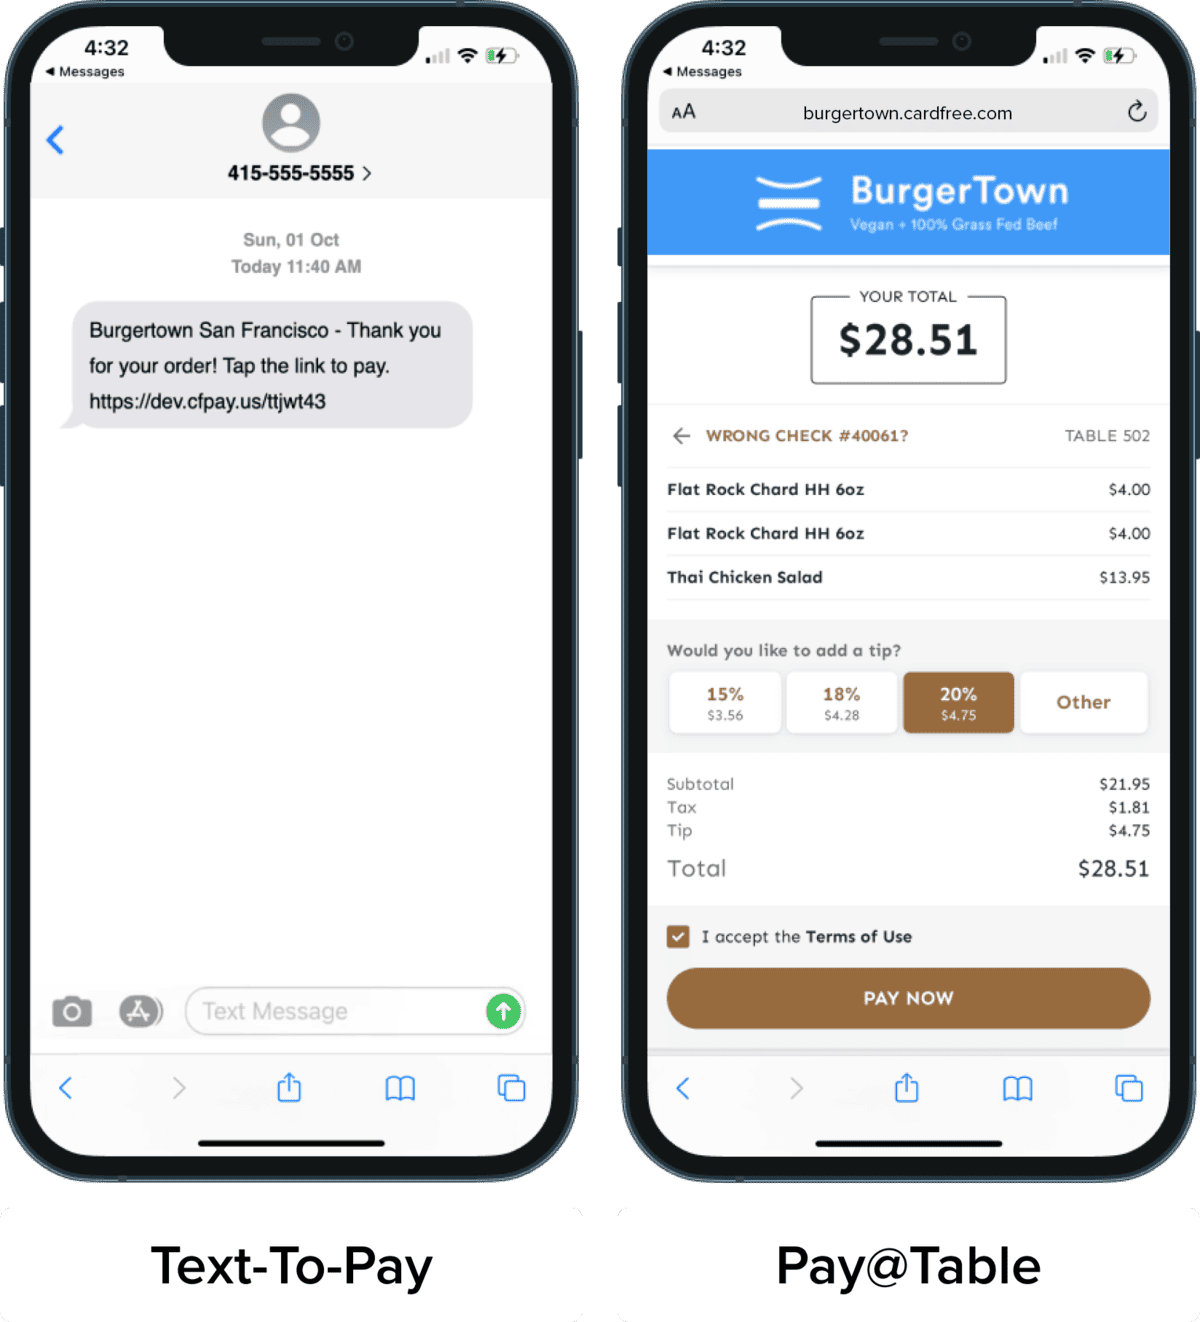 CardFree text-to-pay and pay at table